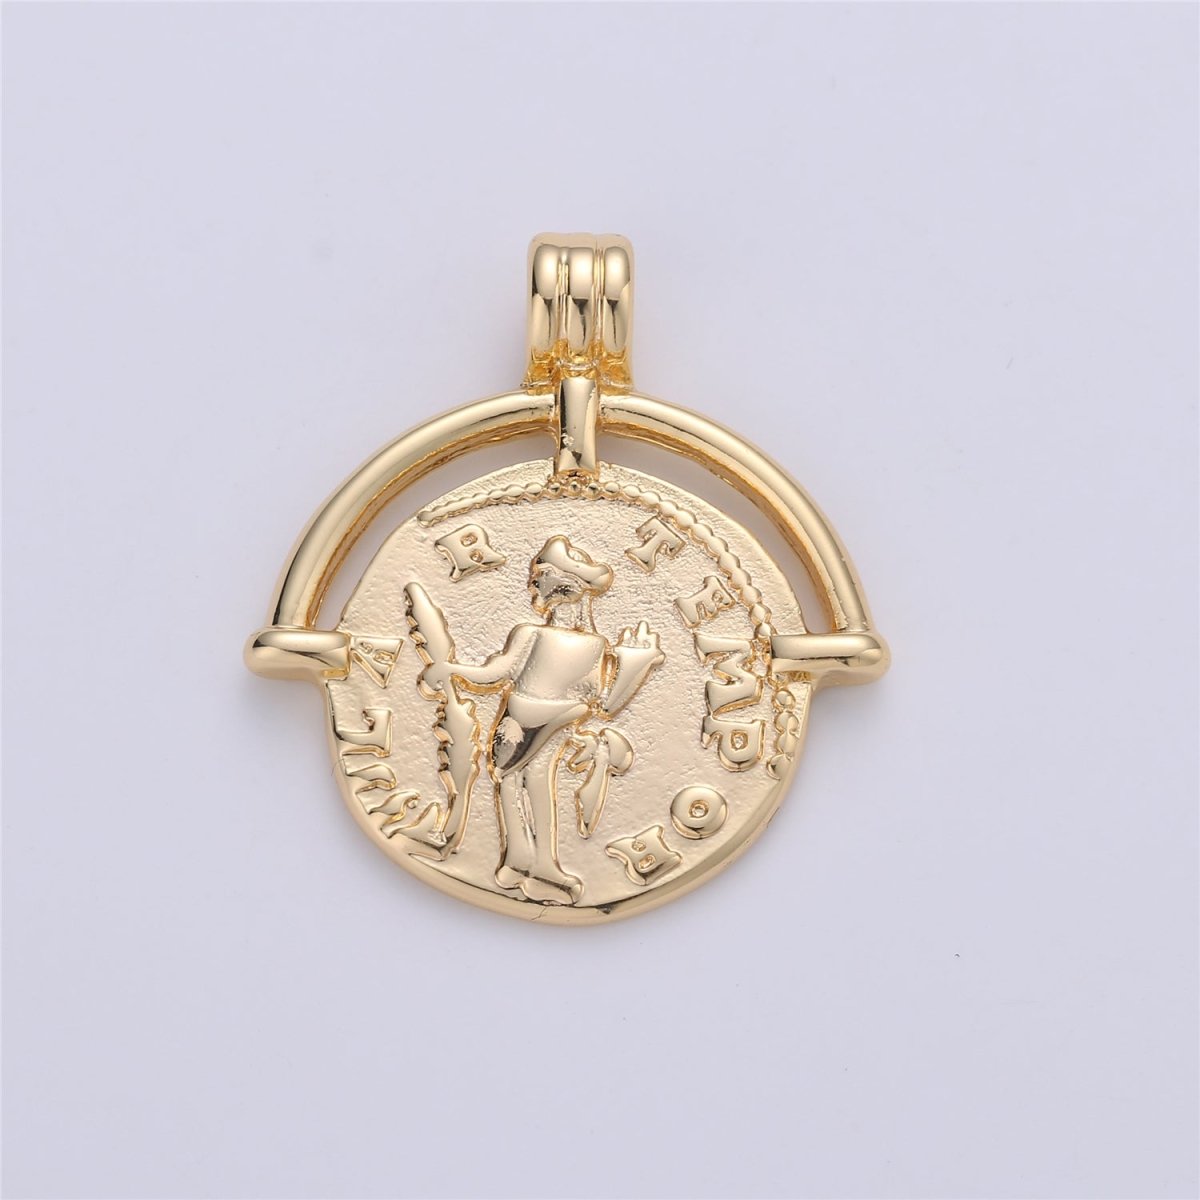 Greek Coin Medallion For Necklace Jewelry Making, 14K Gold Filled For Necklace Charm Bracelet Supply Component C-593 - DLUXCA